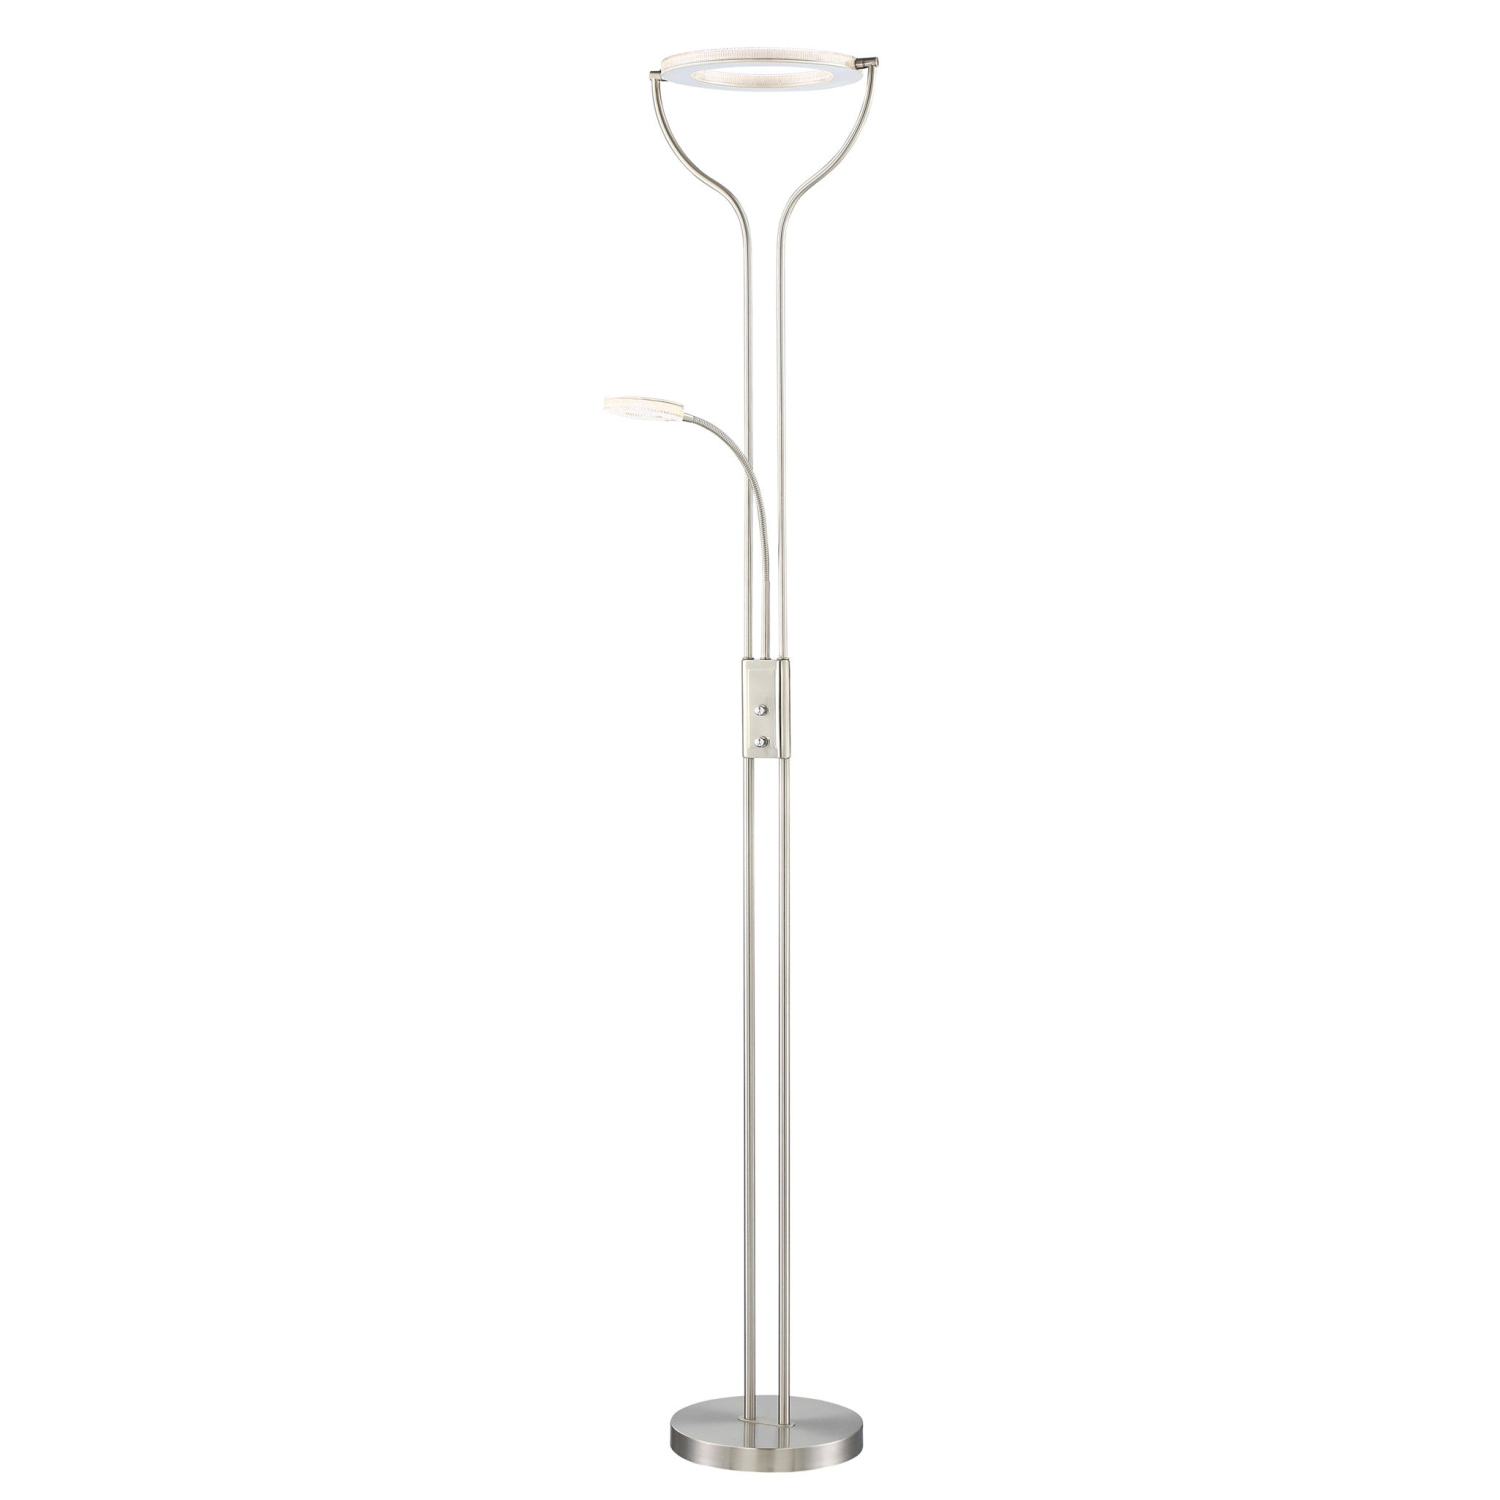 Zale Floor Lamp Picture with White Background